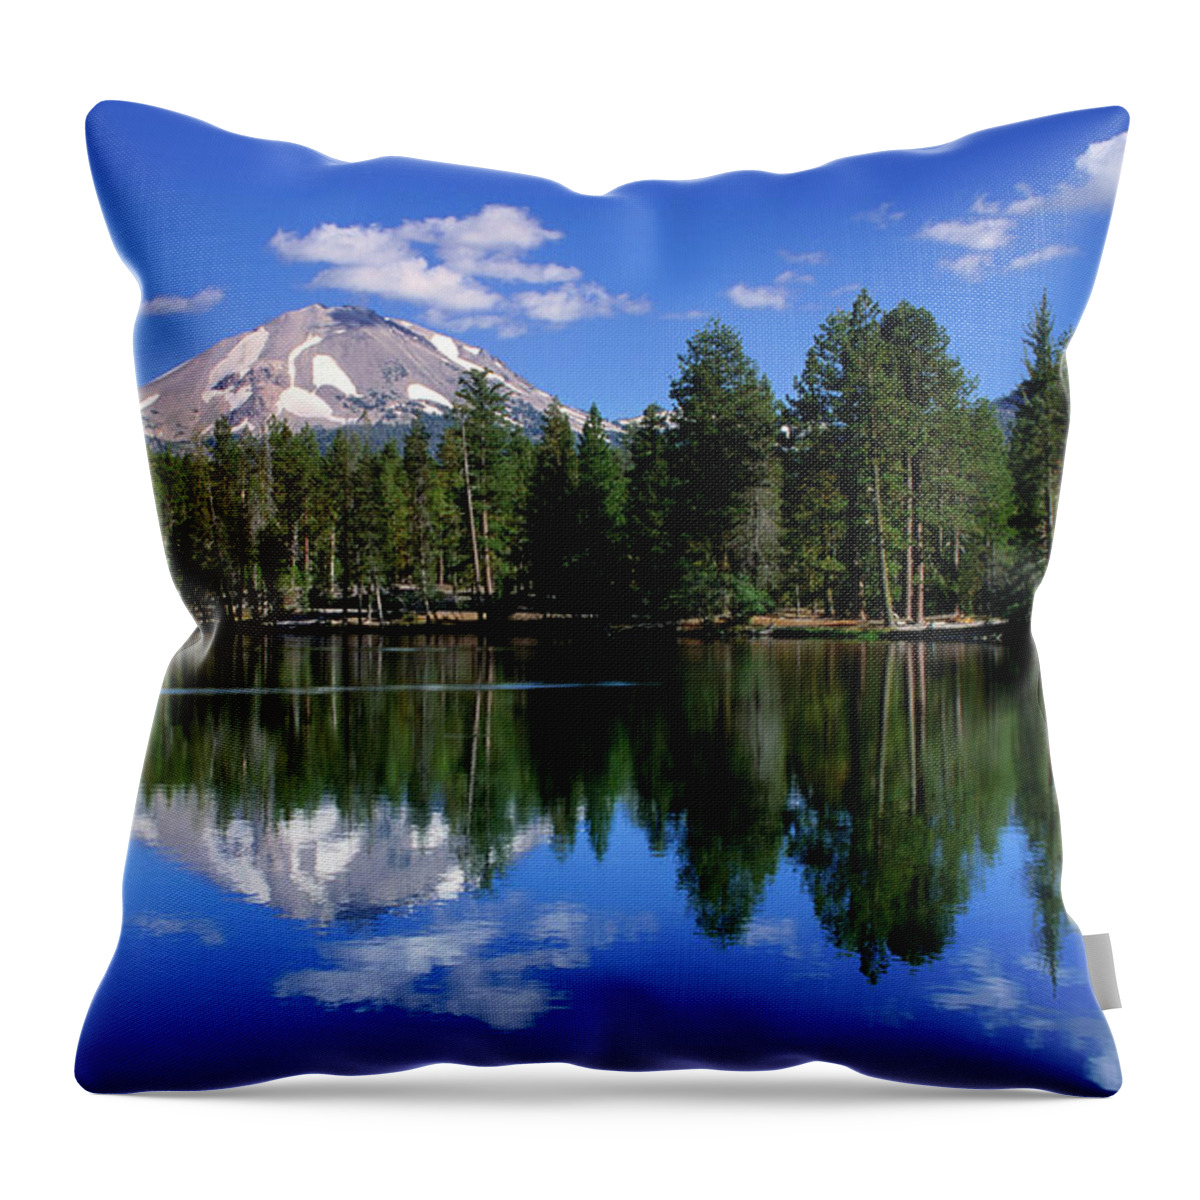 Scenics Throw Pillow featuring the photograph Mt Lassen And Reflection Lake, Lassen by John Elk Iii